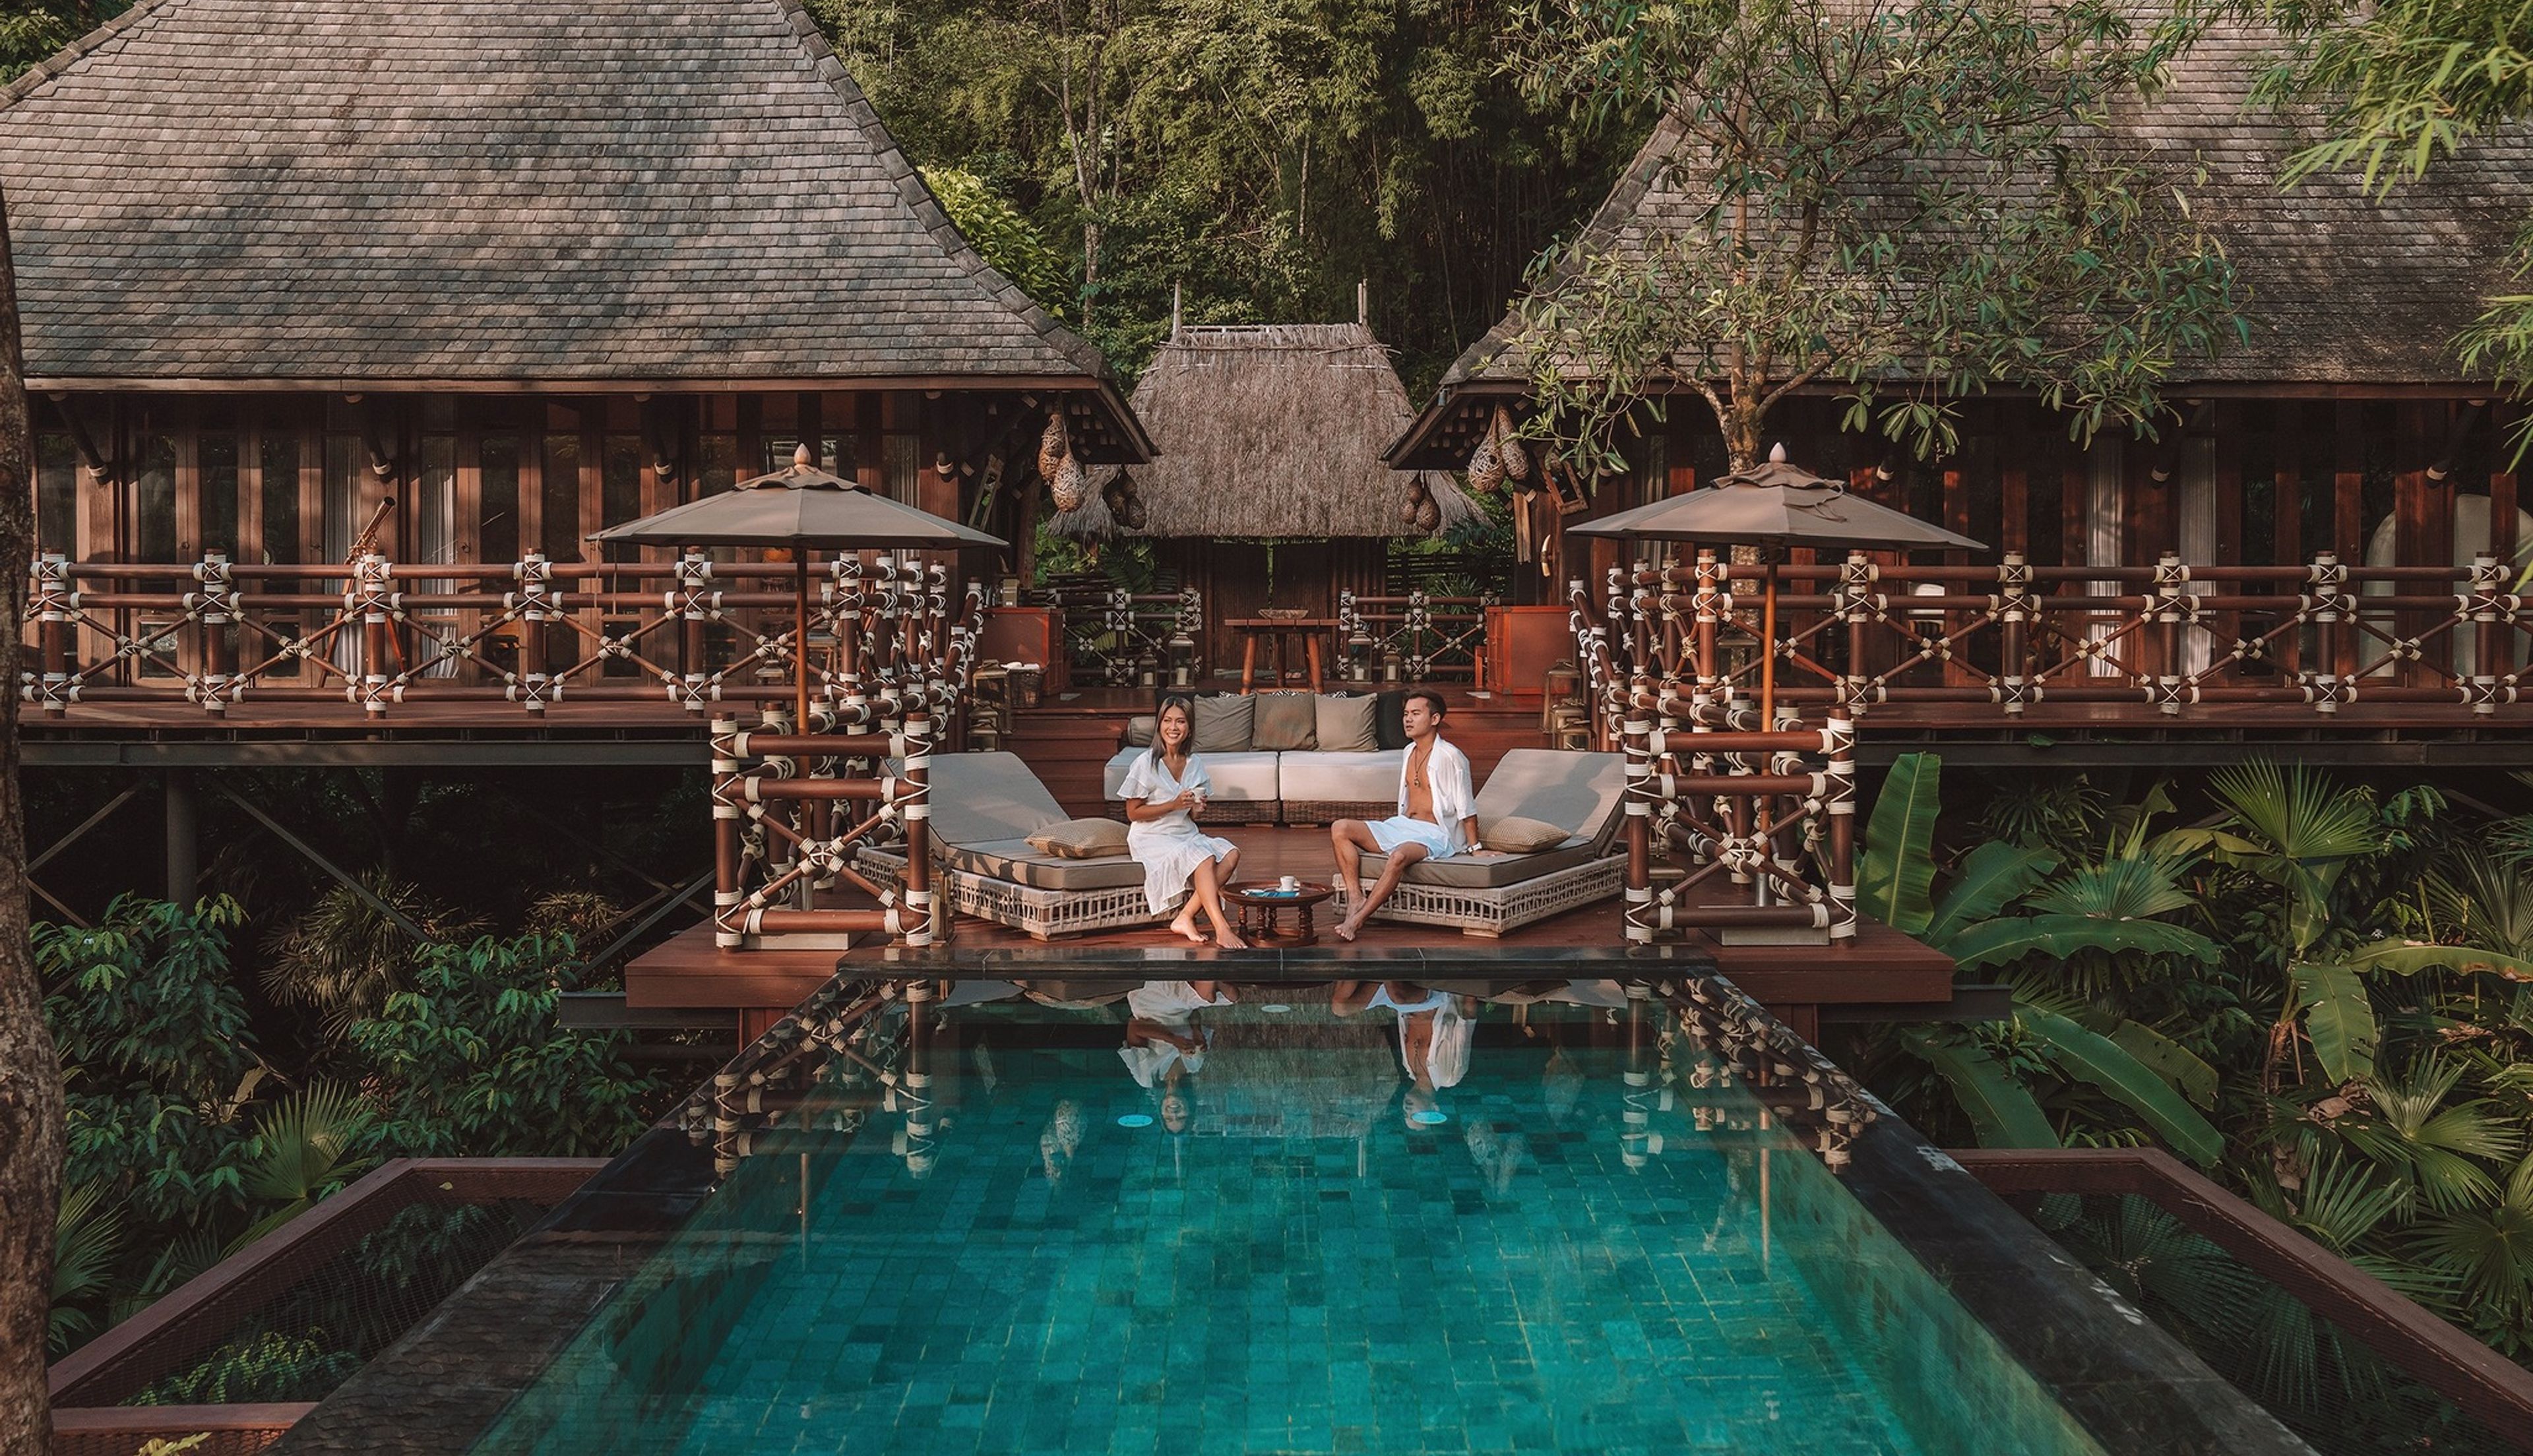 four seasons tented camp golden triangle thailand